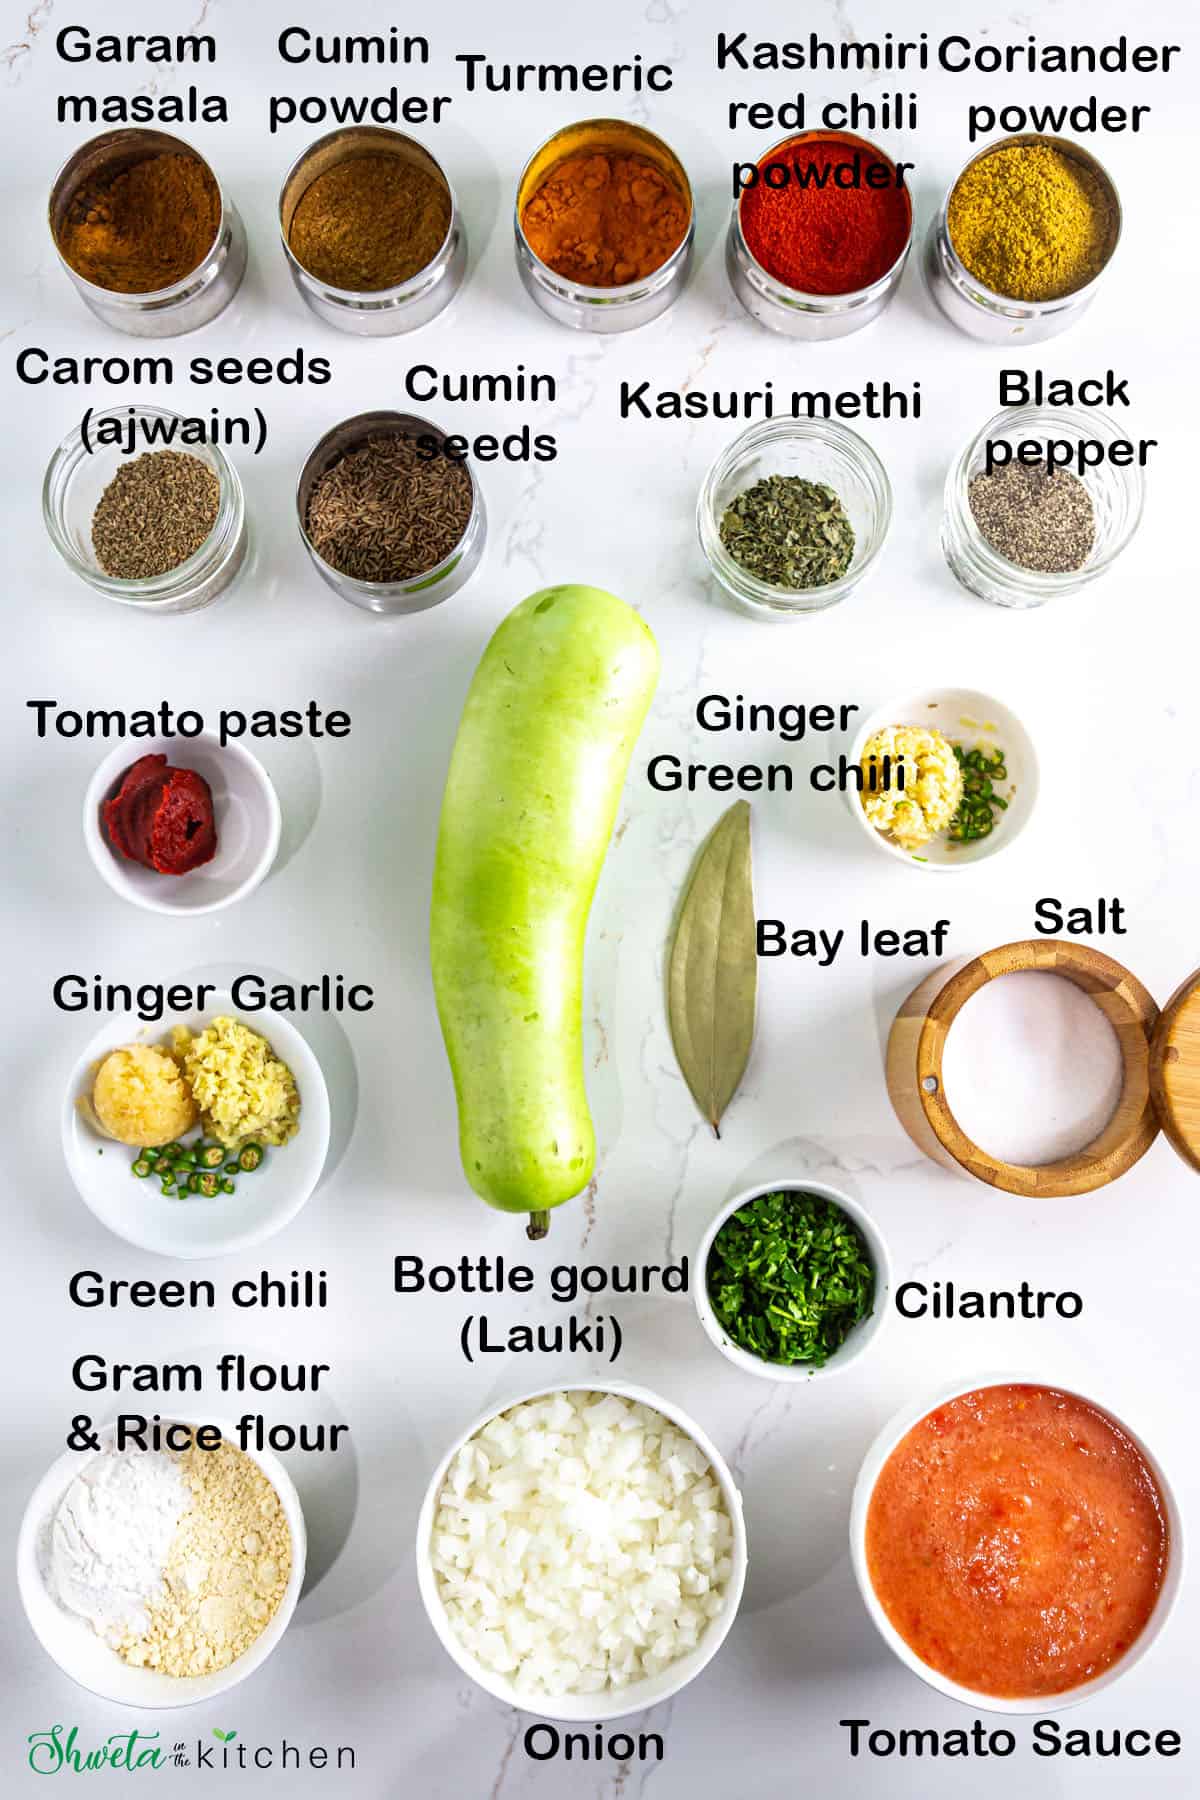 Ingredients for lauki (bottle gourd) kofta curry on white surface 